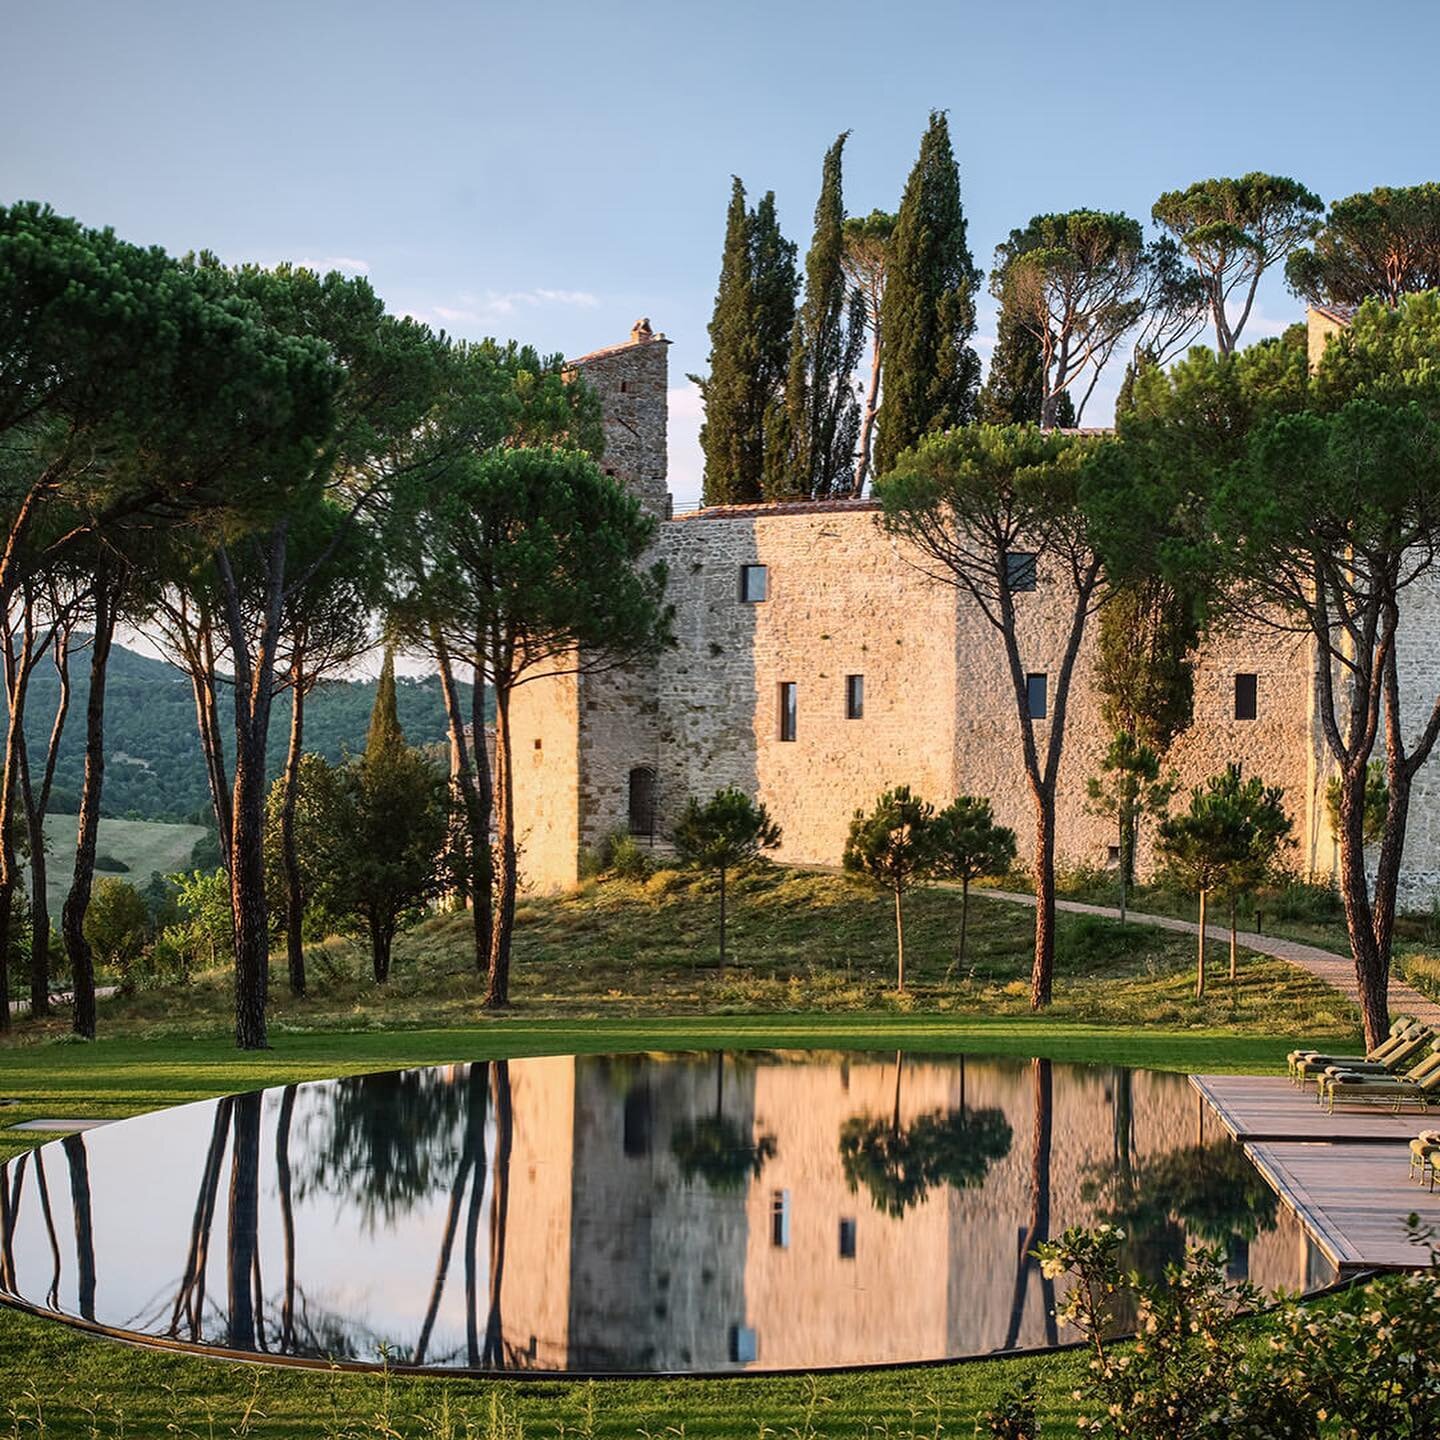 Beautiful Reschio, Italy&rsquo;s most exciting new hotel, set in the beautiful Umbrian hills. 

This thousand-year-old, family owned castle has been meticulously and exquisitely restored by the owners, and each room individually designed with plenty 